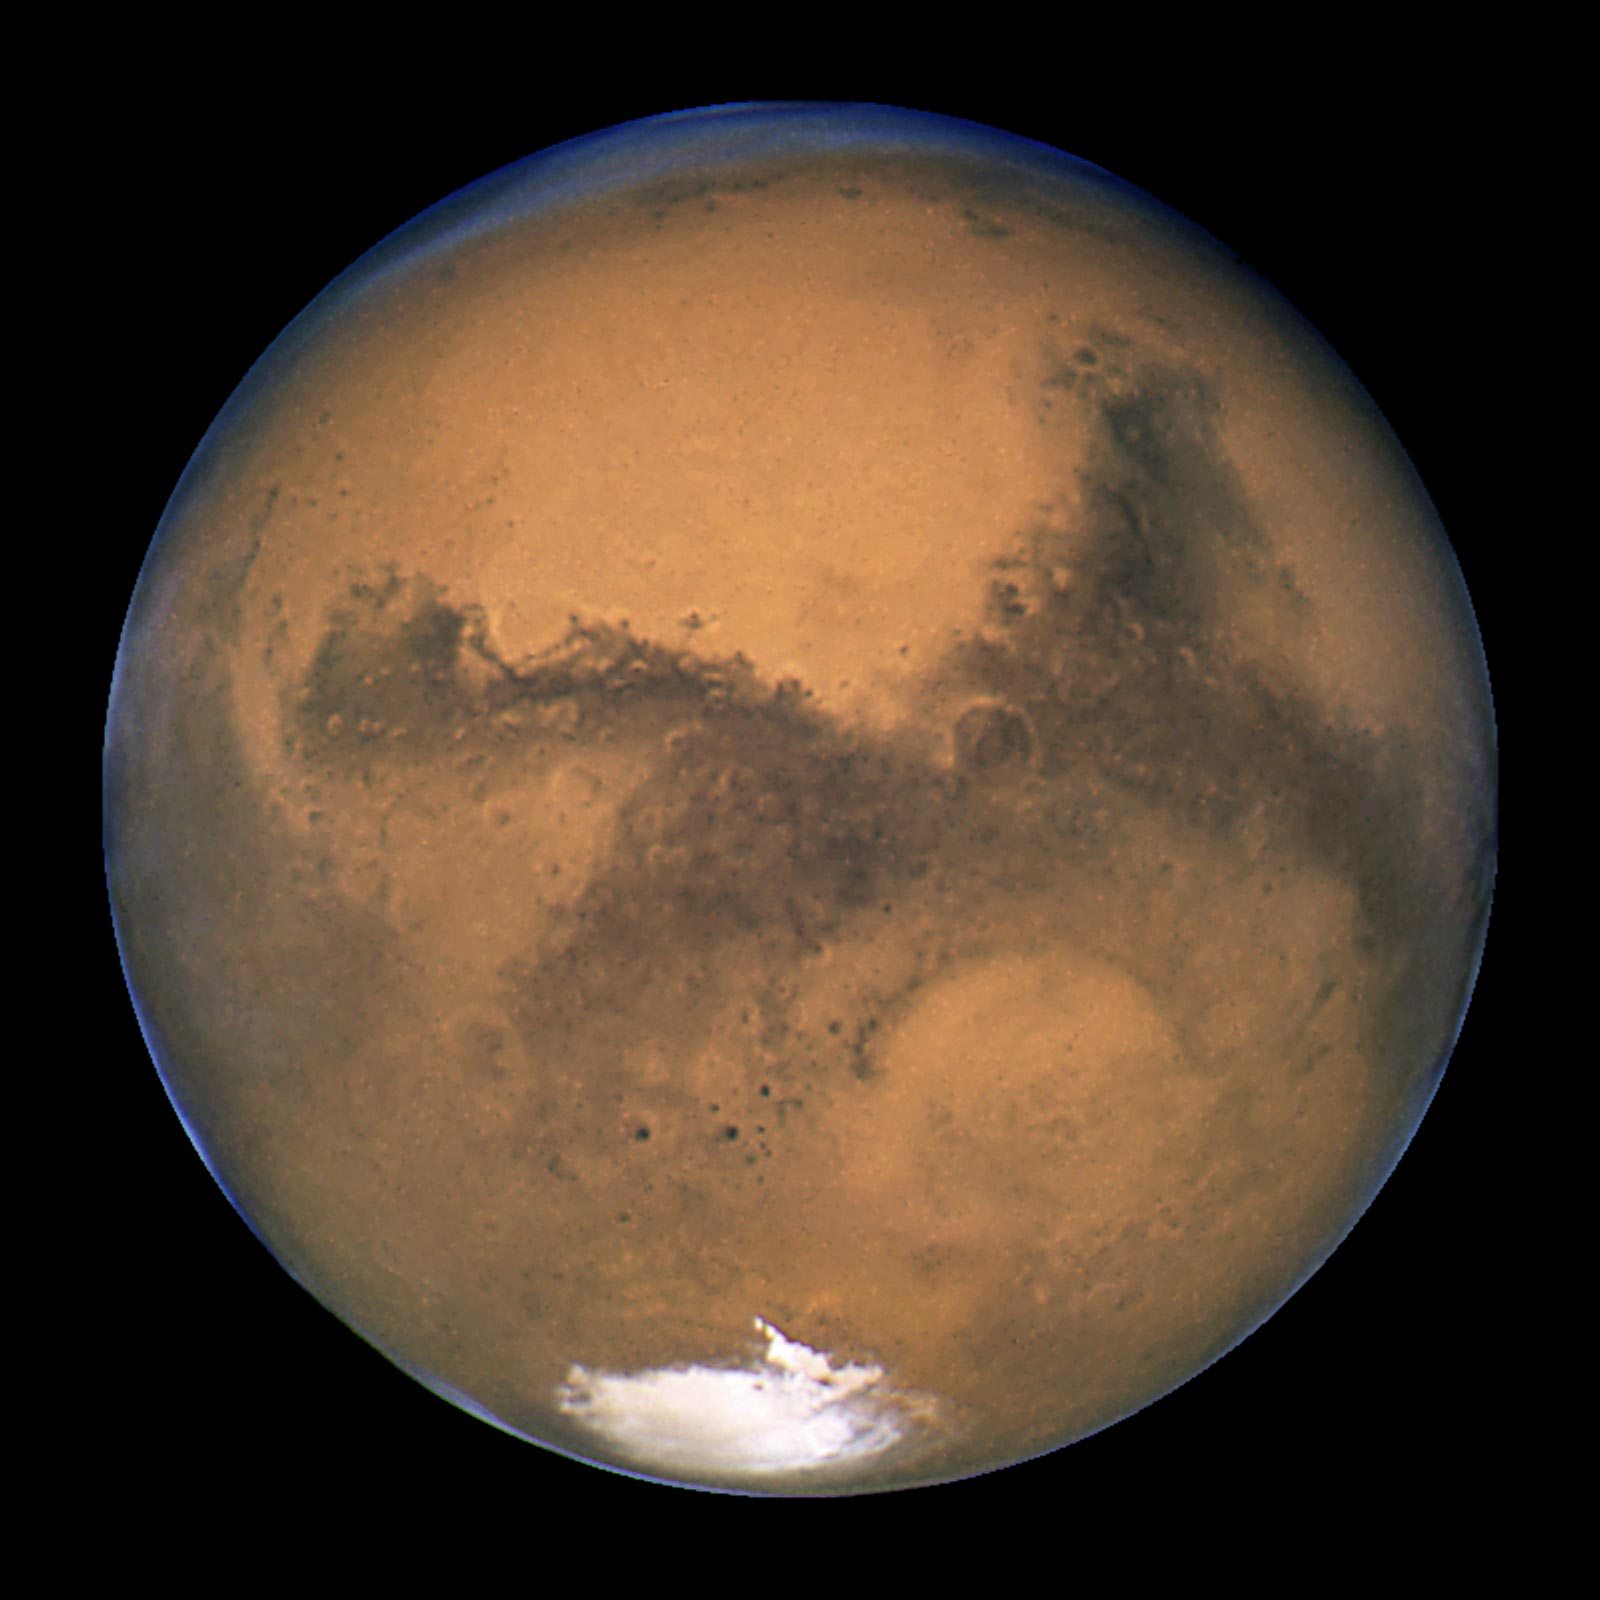  Mars showing its unique colors, courtesy of the Hubble Space Telescope 